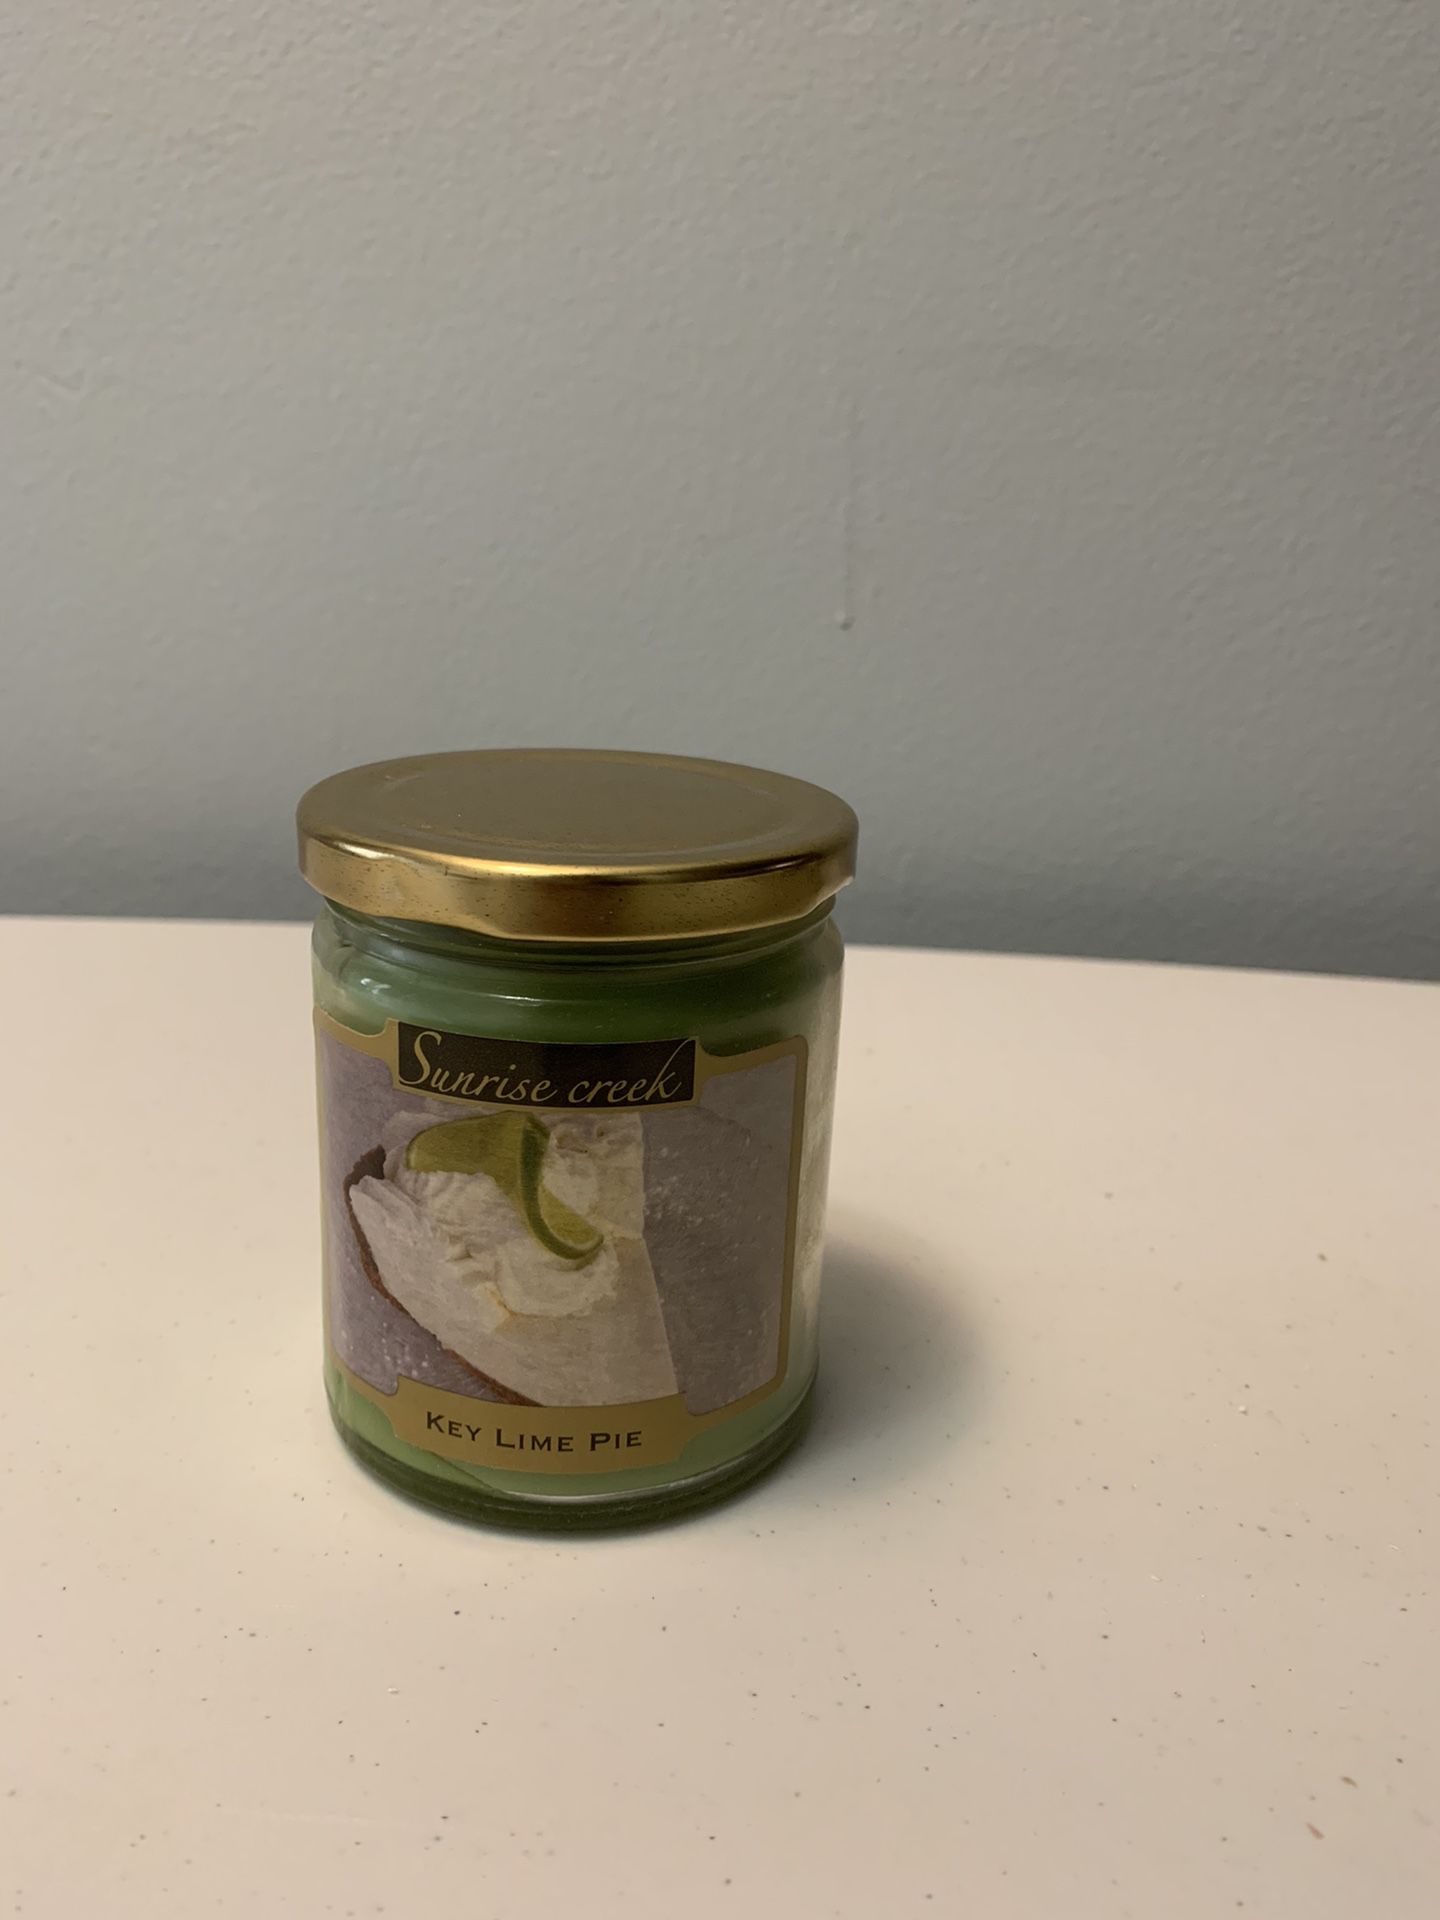 Sunrise Creek Key Lime Pie Scent Candle (Brand New)